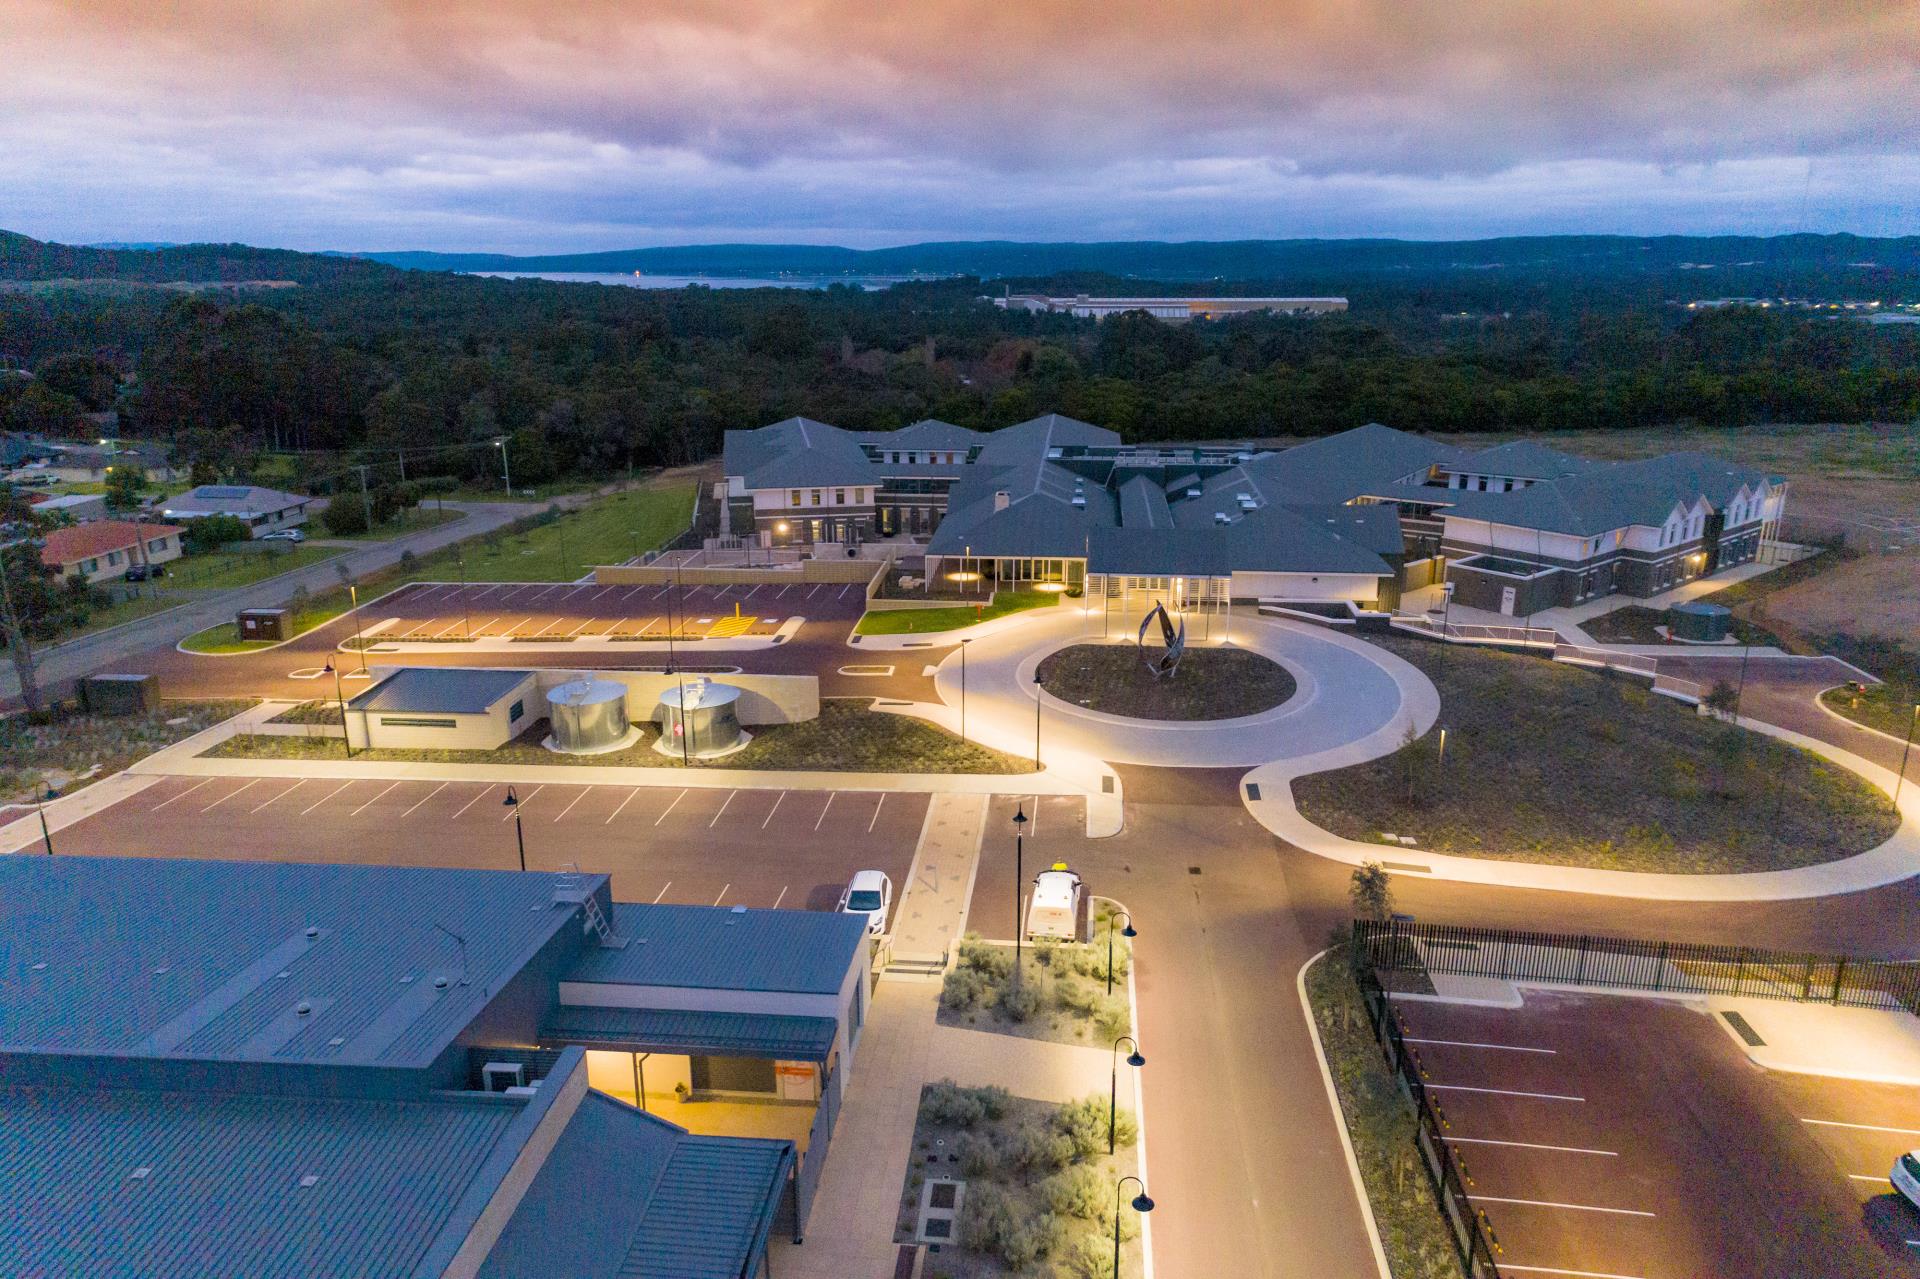 Lockyer Residential Care Facility